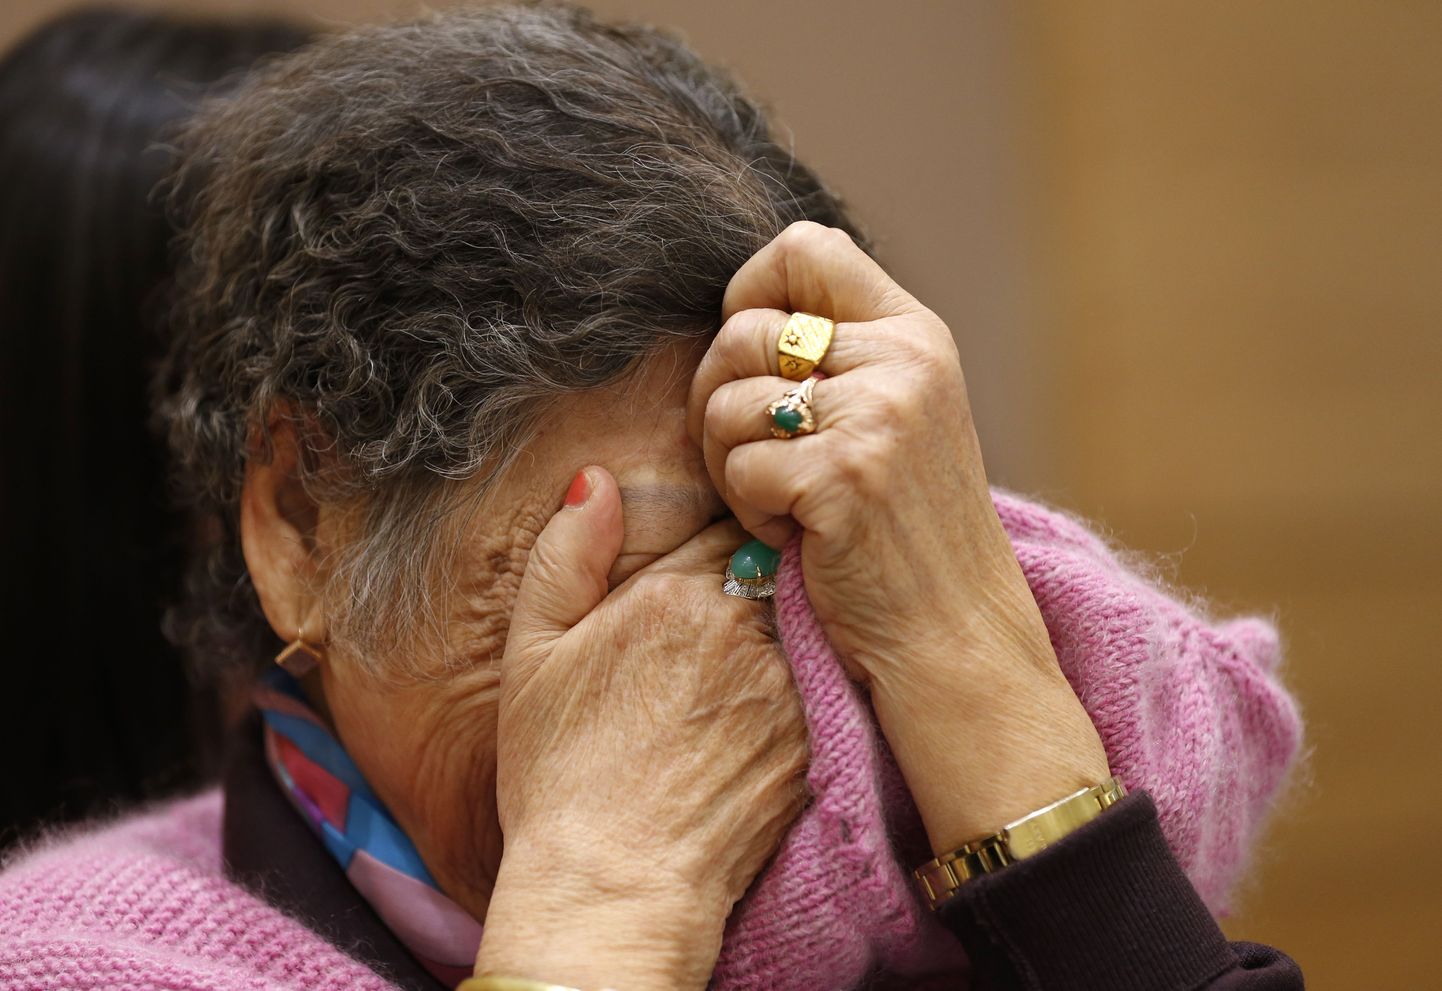 Kang Il-chul, a South Korean woman abused by Japan's wartime military-run brothel system, cries during a press conference in Tokyo, Tuesday, Jan. 26, 2016. Two elderly South Korean women, Kang and Lee Ok-sun, are in Japan to reject a recent settlement agreement between the two governments and demand that Prime Minister Shinzo Abe give them a face-to-face apology and formal compensation. (AP Photo/Shizuo Kambayashi)